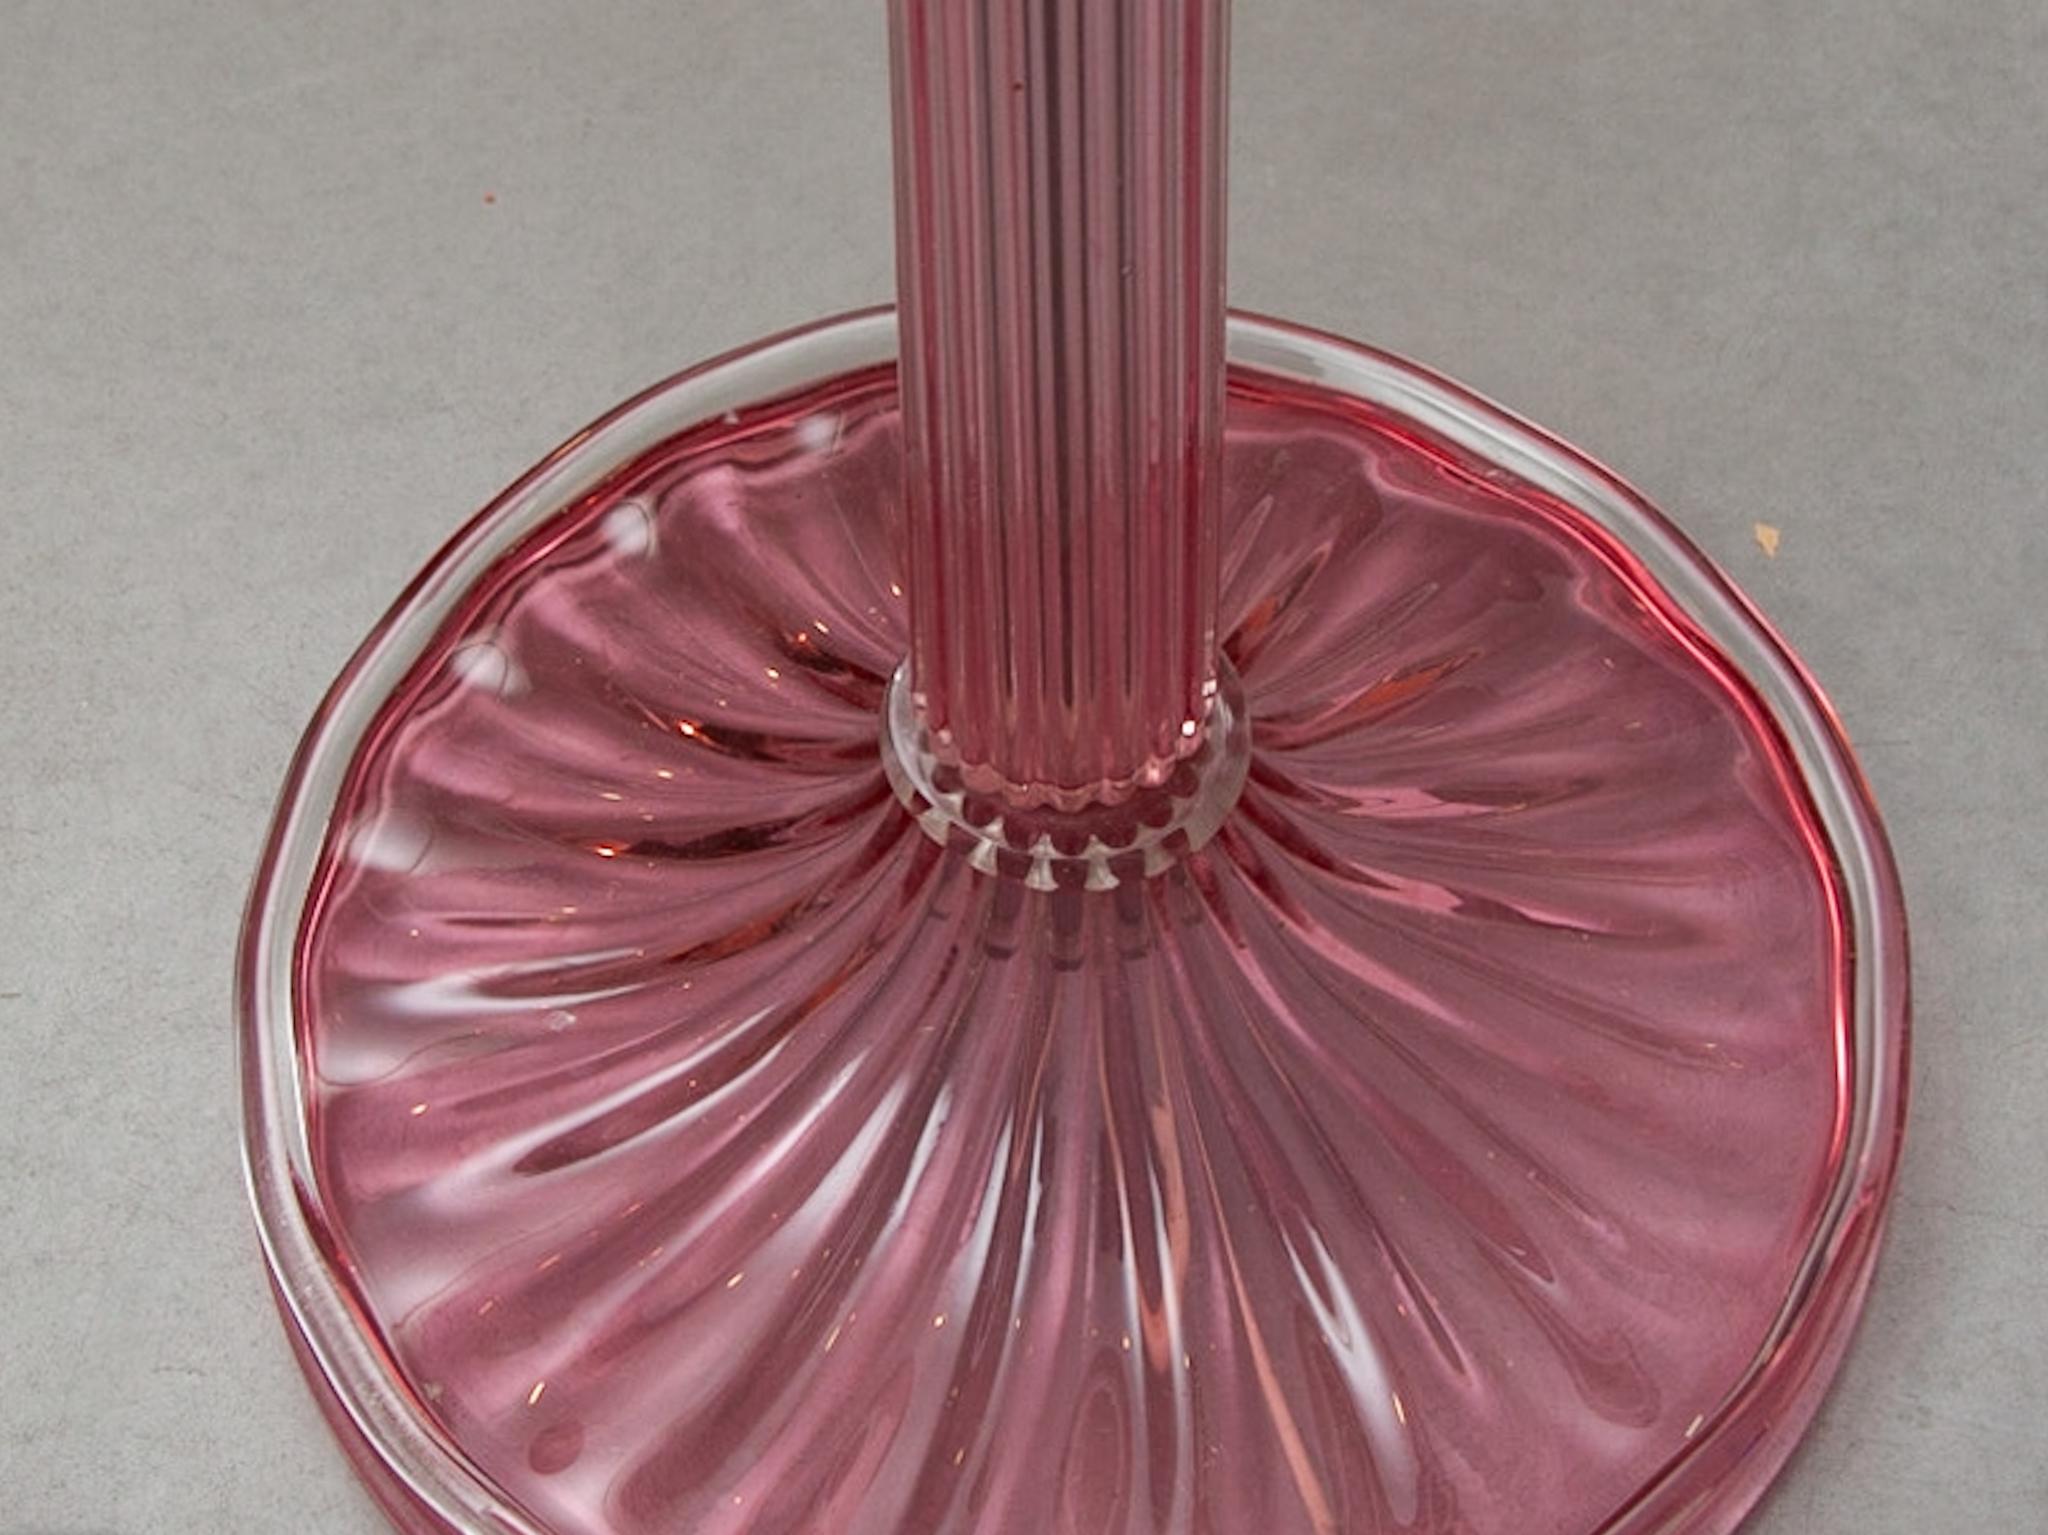 Barovier e Tosso Pink Art Glass Floor Lamp, Murano Blown Glass, 1950s, Italy For Sale 5